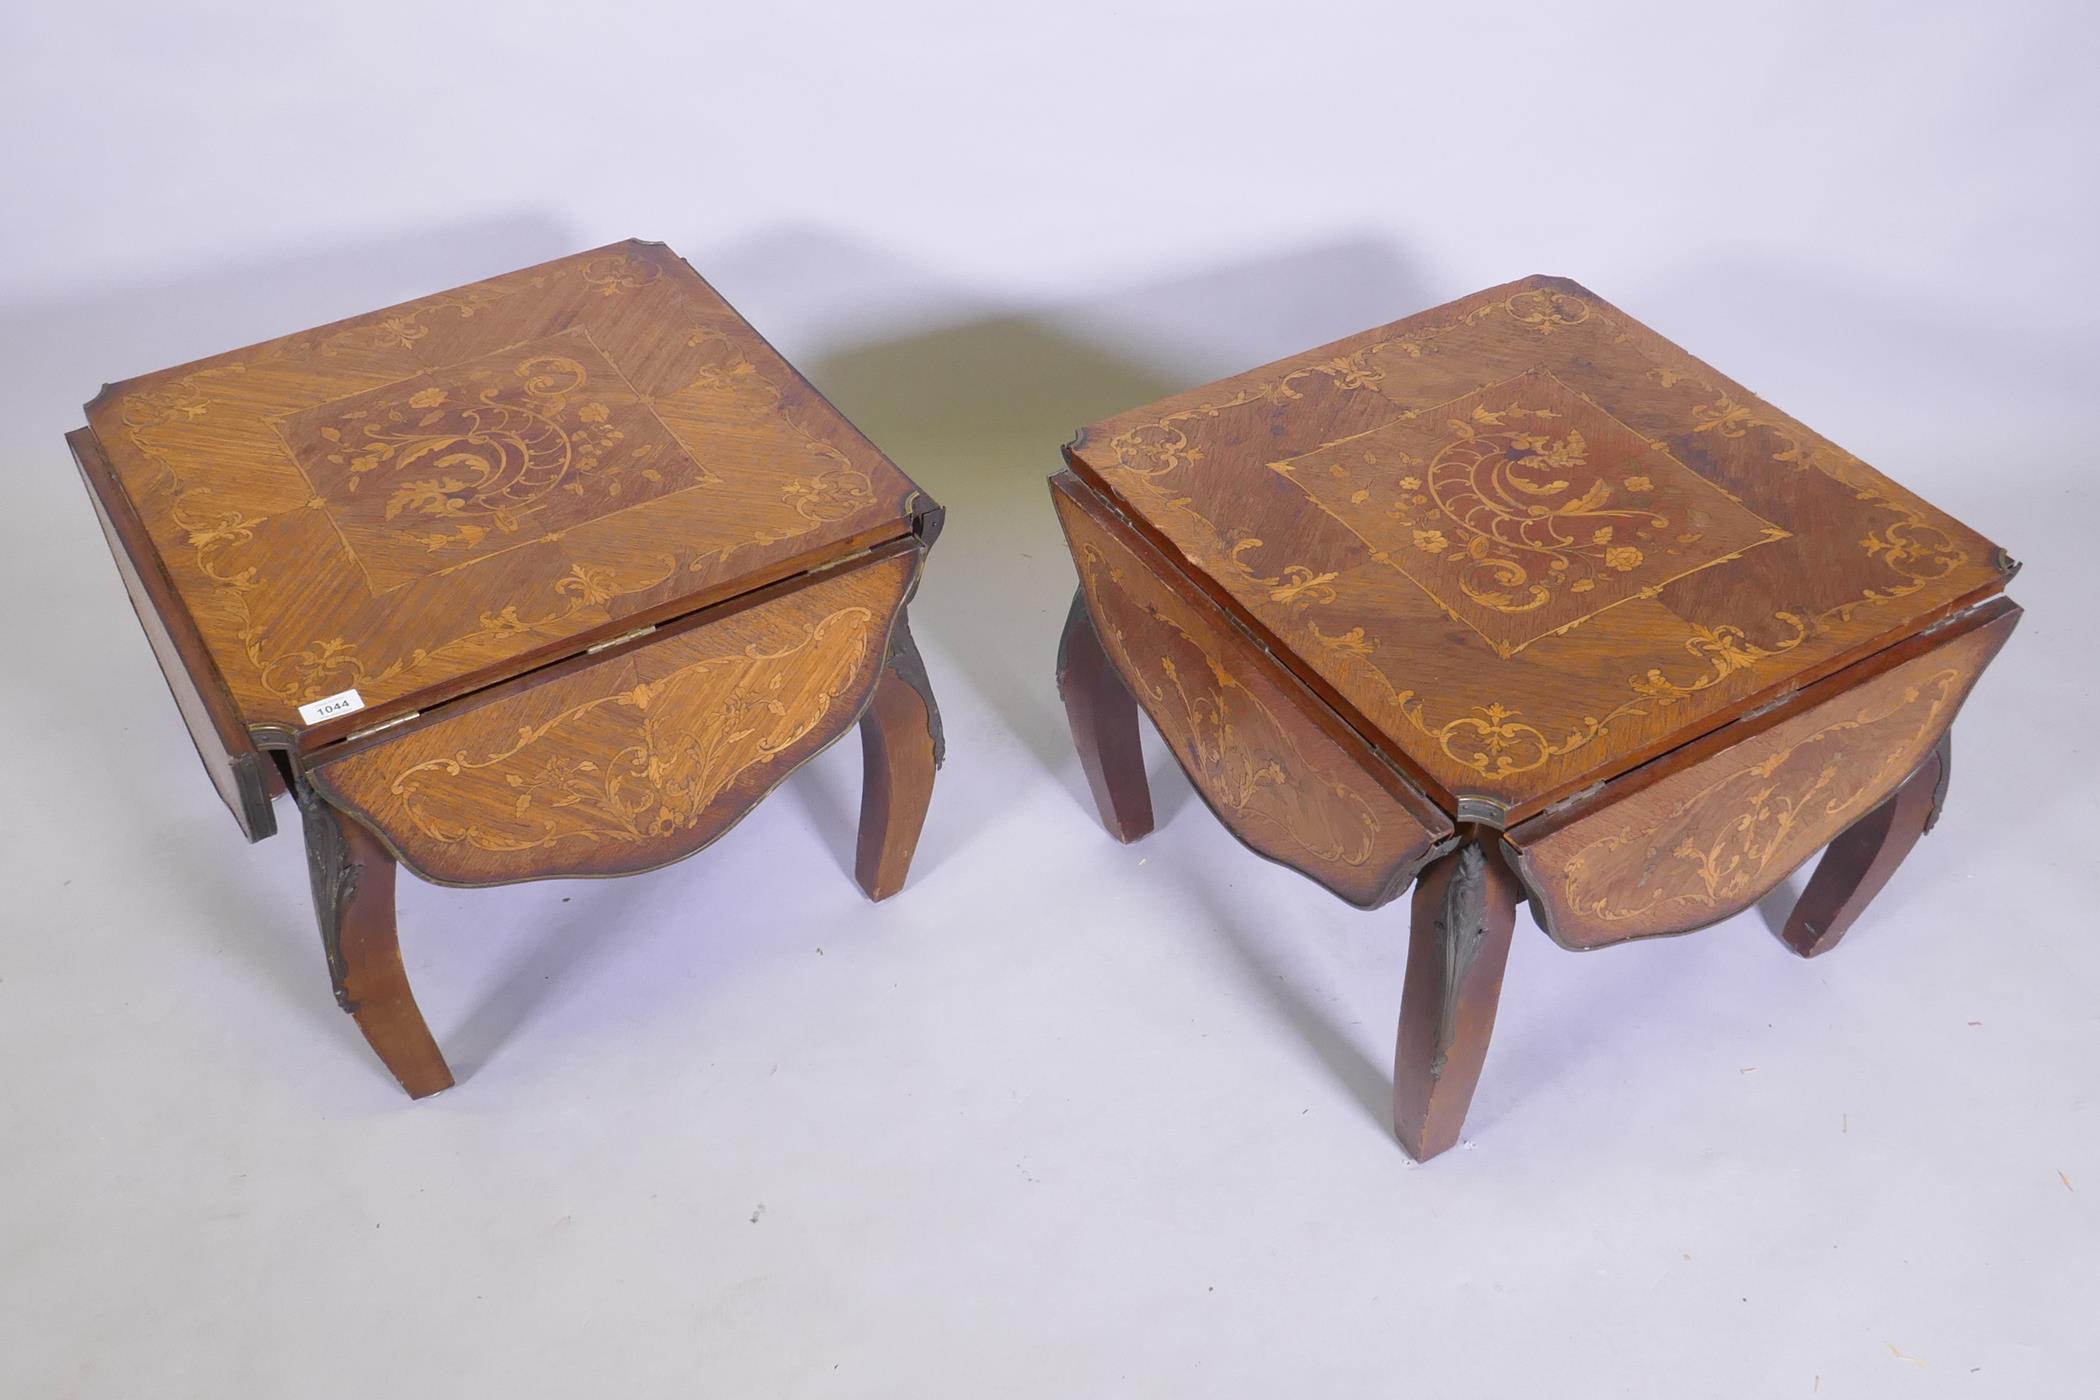 A pair of antique marquetry inlaid kingwood tables with a shaped top and ormolu mounts, reduced, - Image 2 of 5